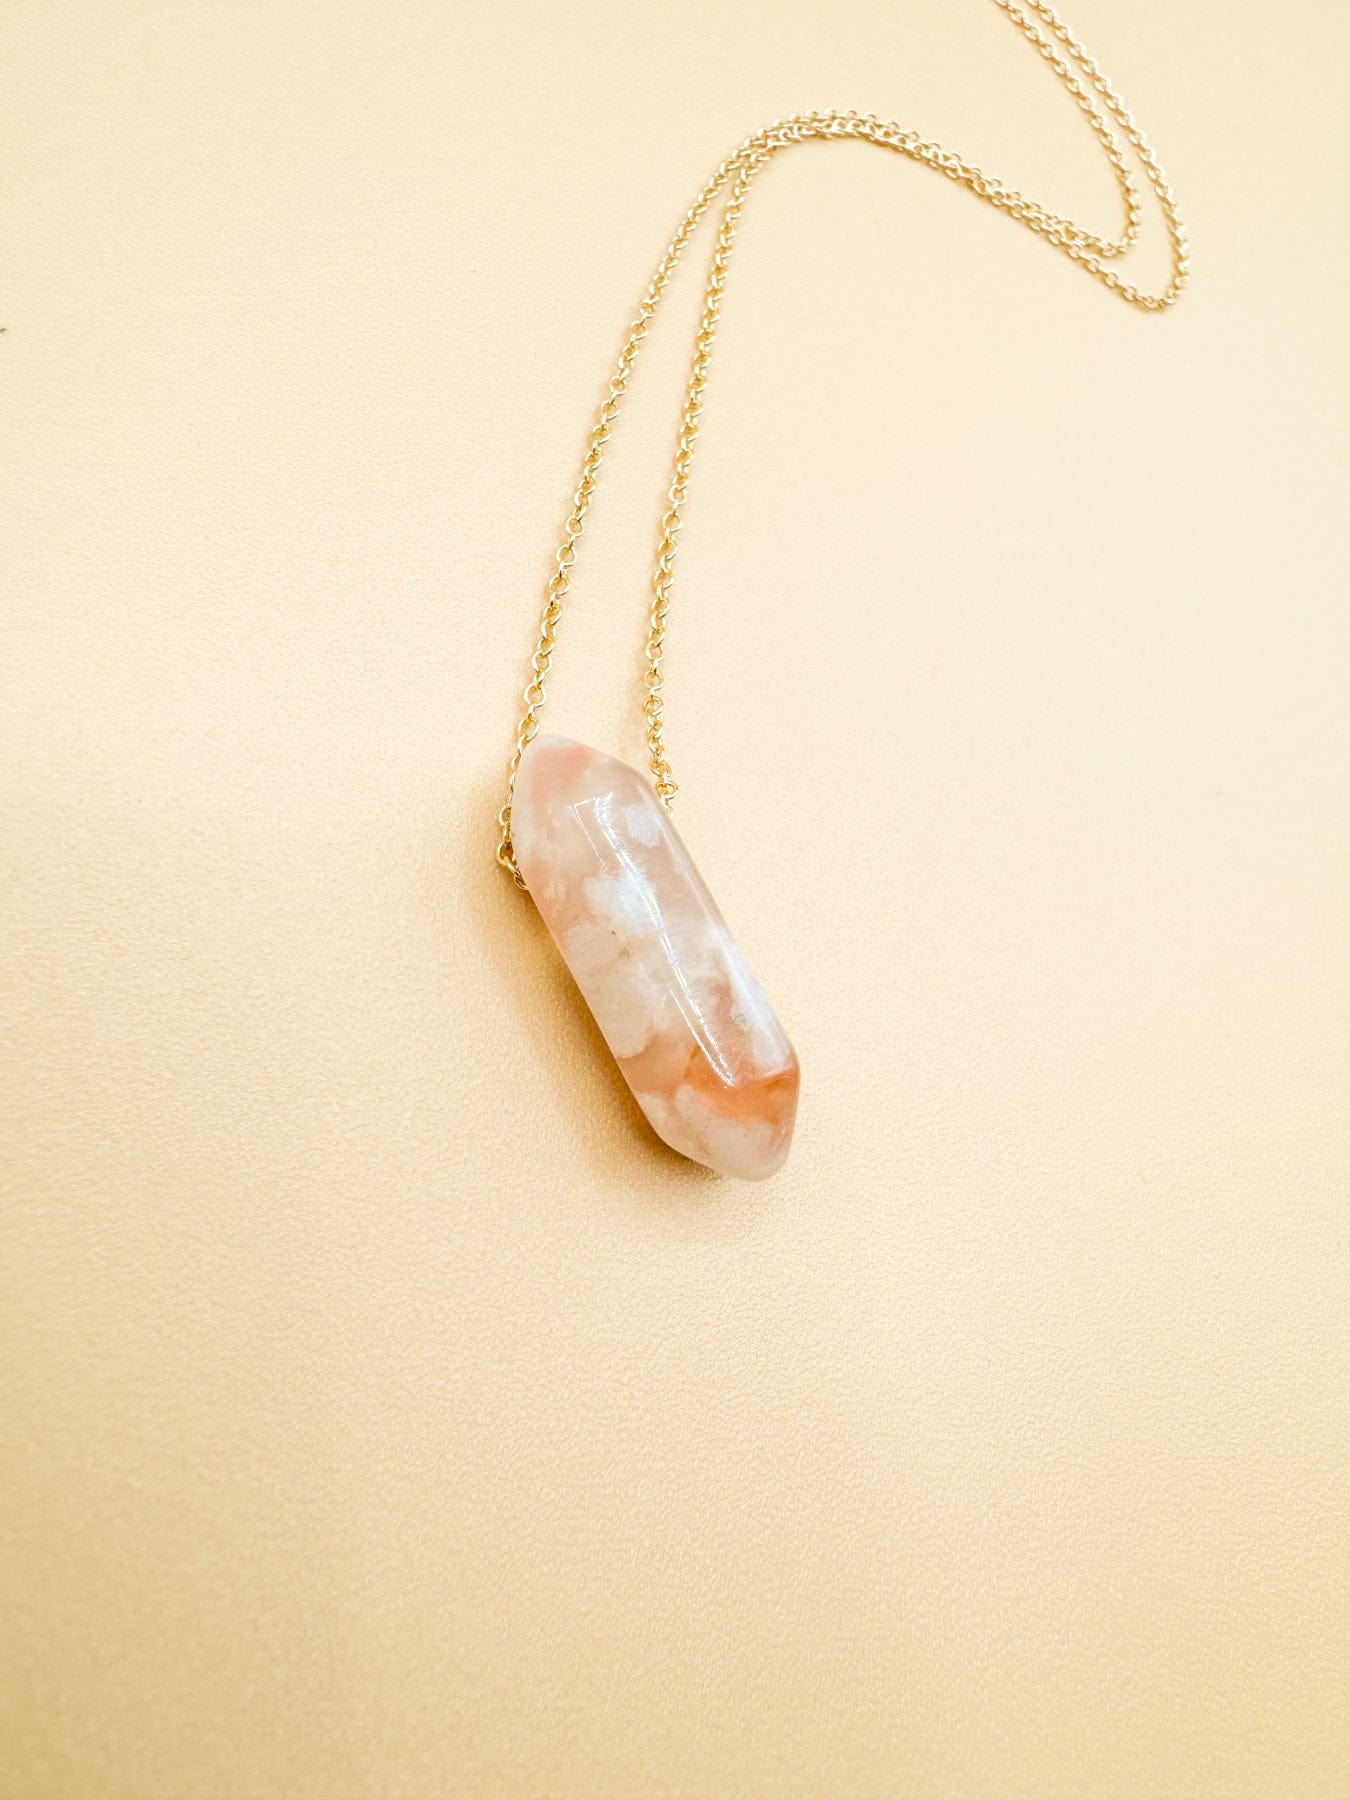 Flower Agate Crystal Necklace Dainty Necklace Flower Agate Crystal Necklace | You Deserve All the Flowers